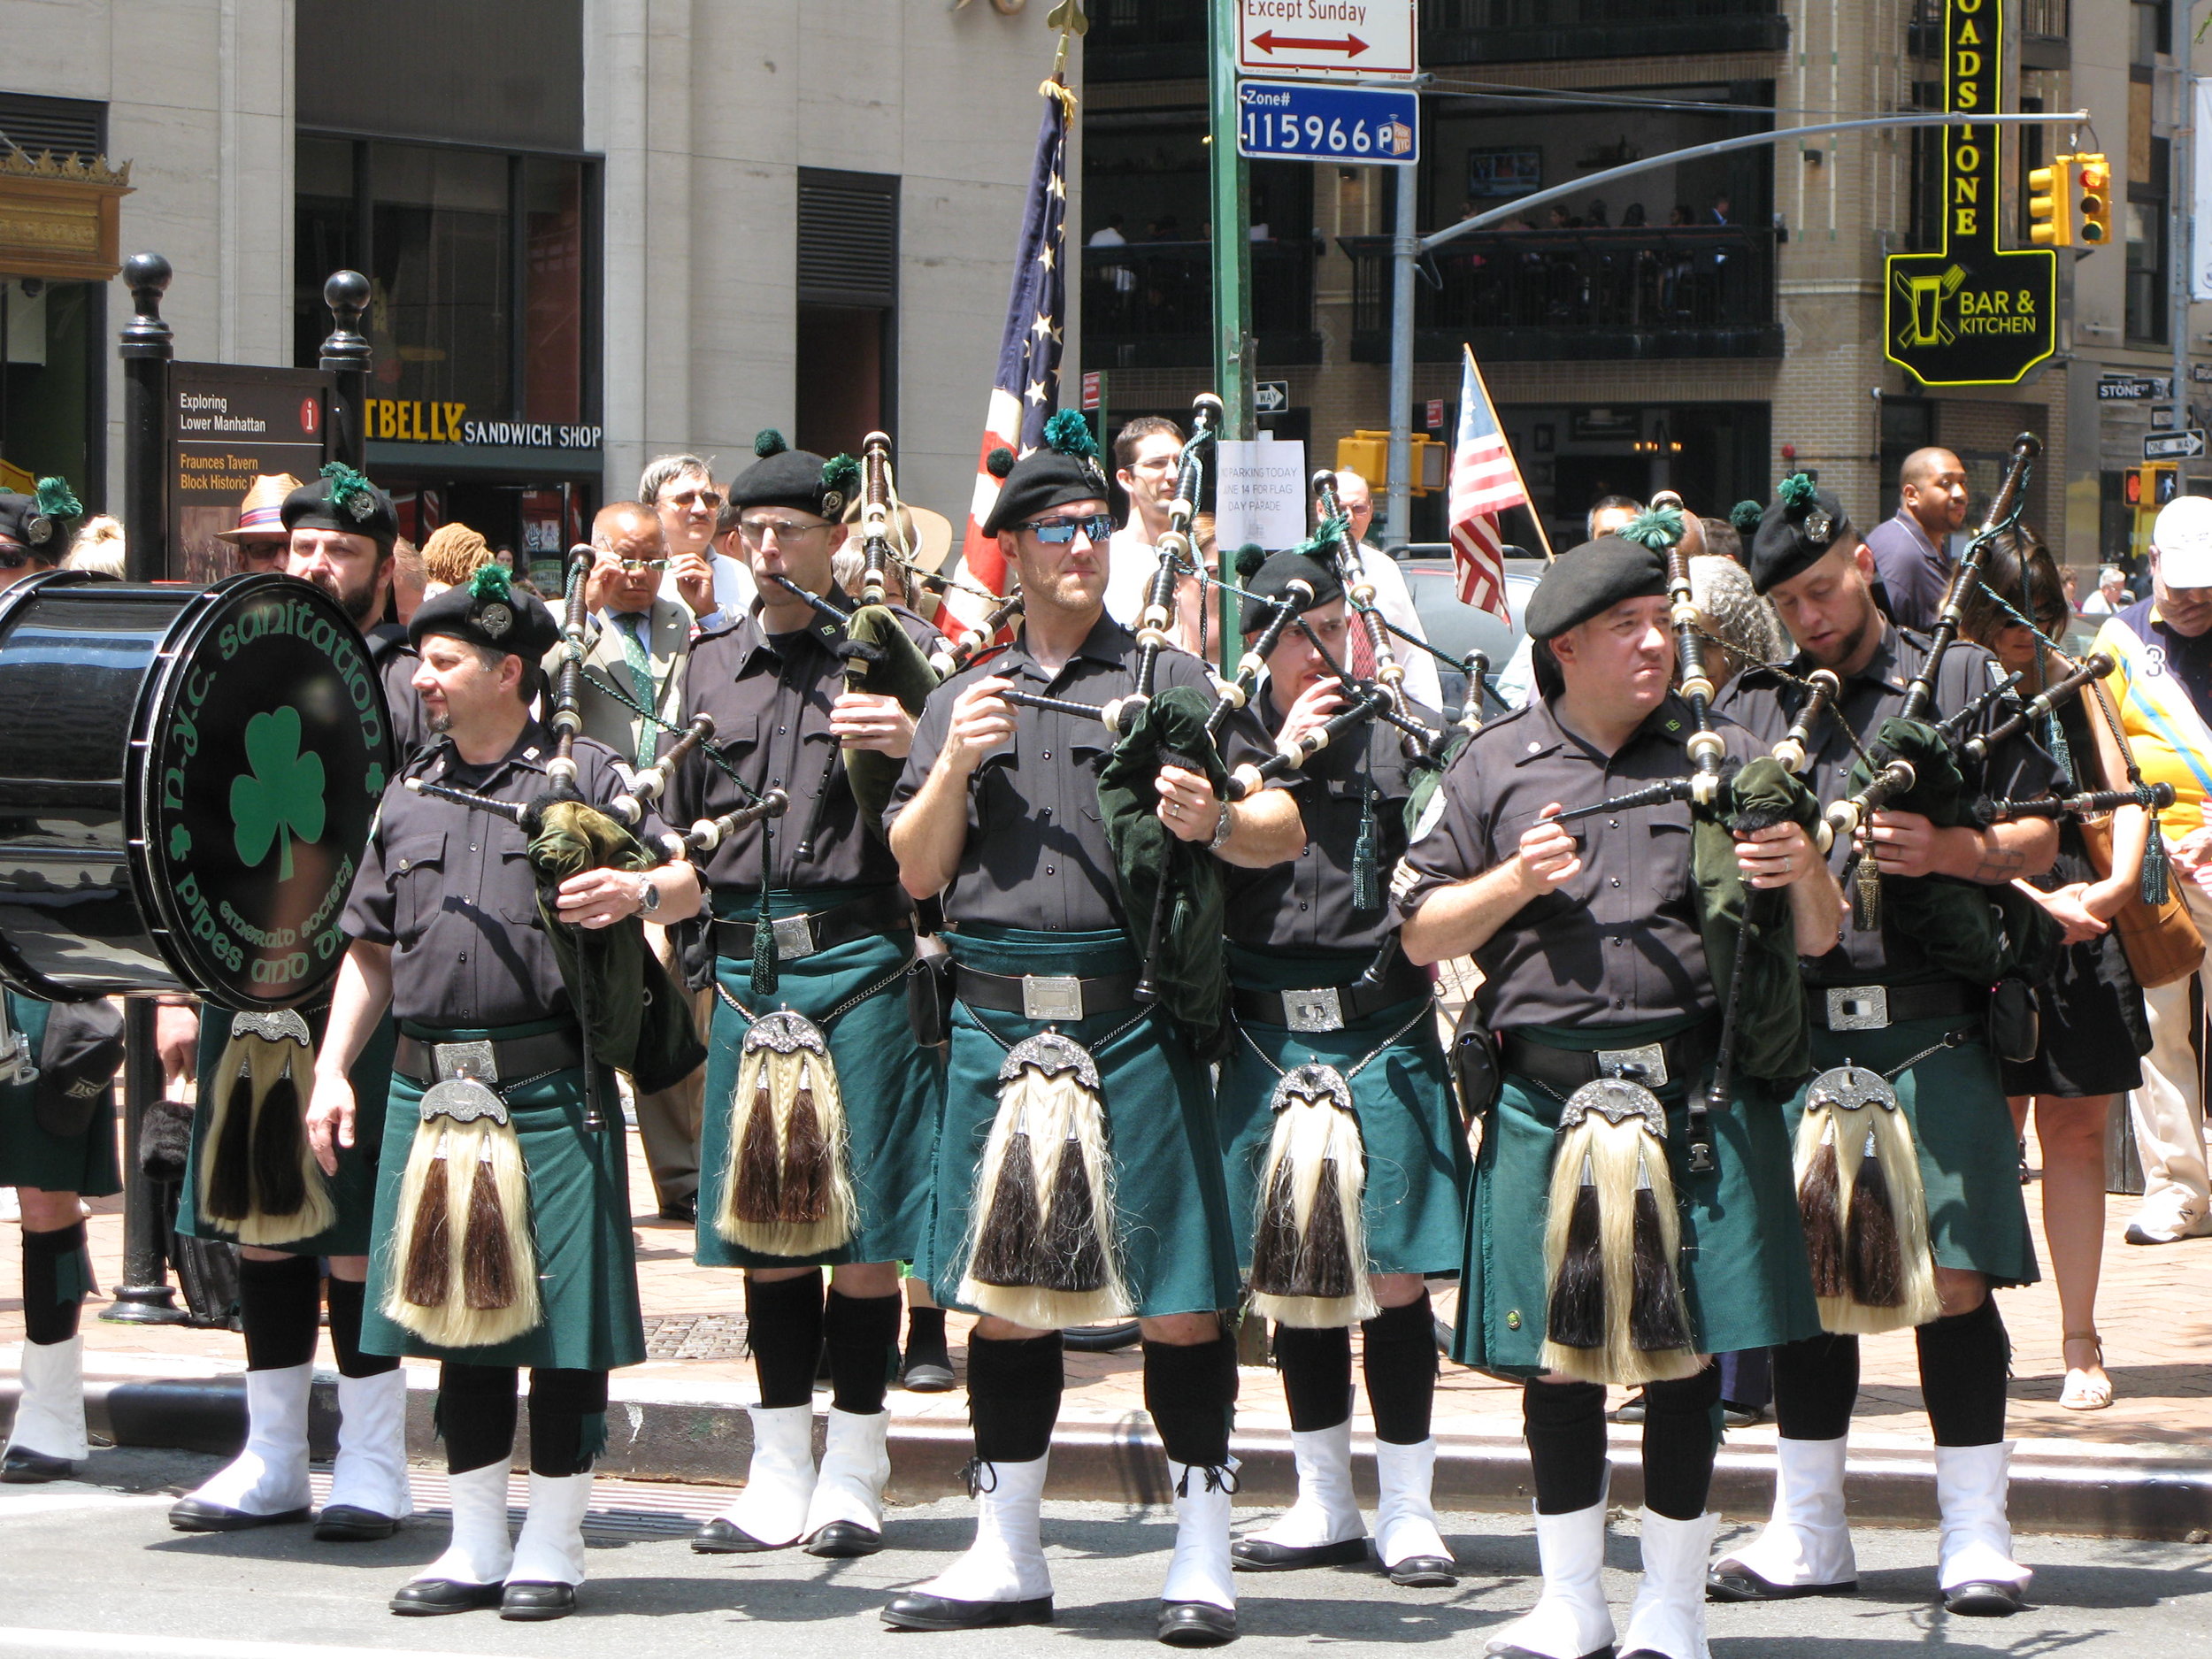 Flag Day 2017 NYC Dept of Sanitation Pipes & Drums of the Emerald Society.JPG